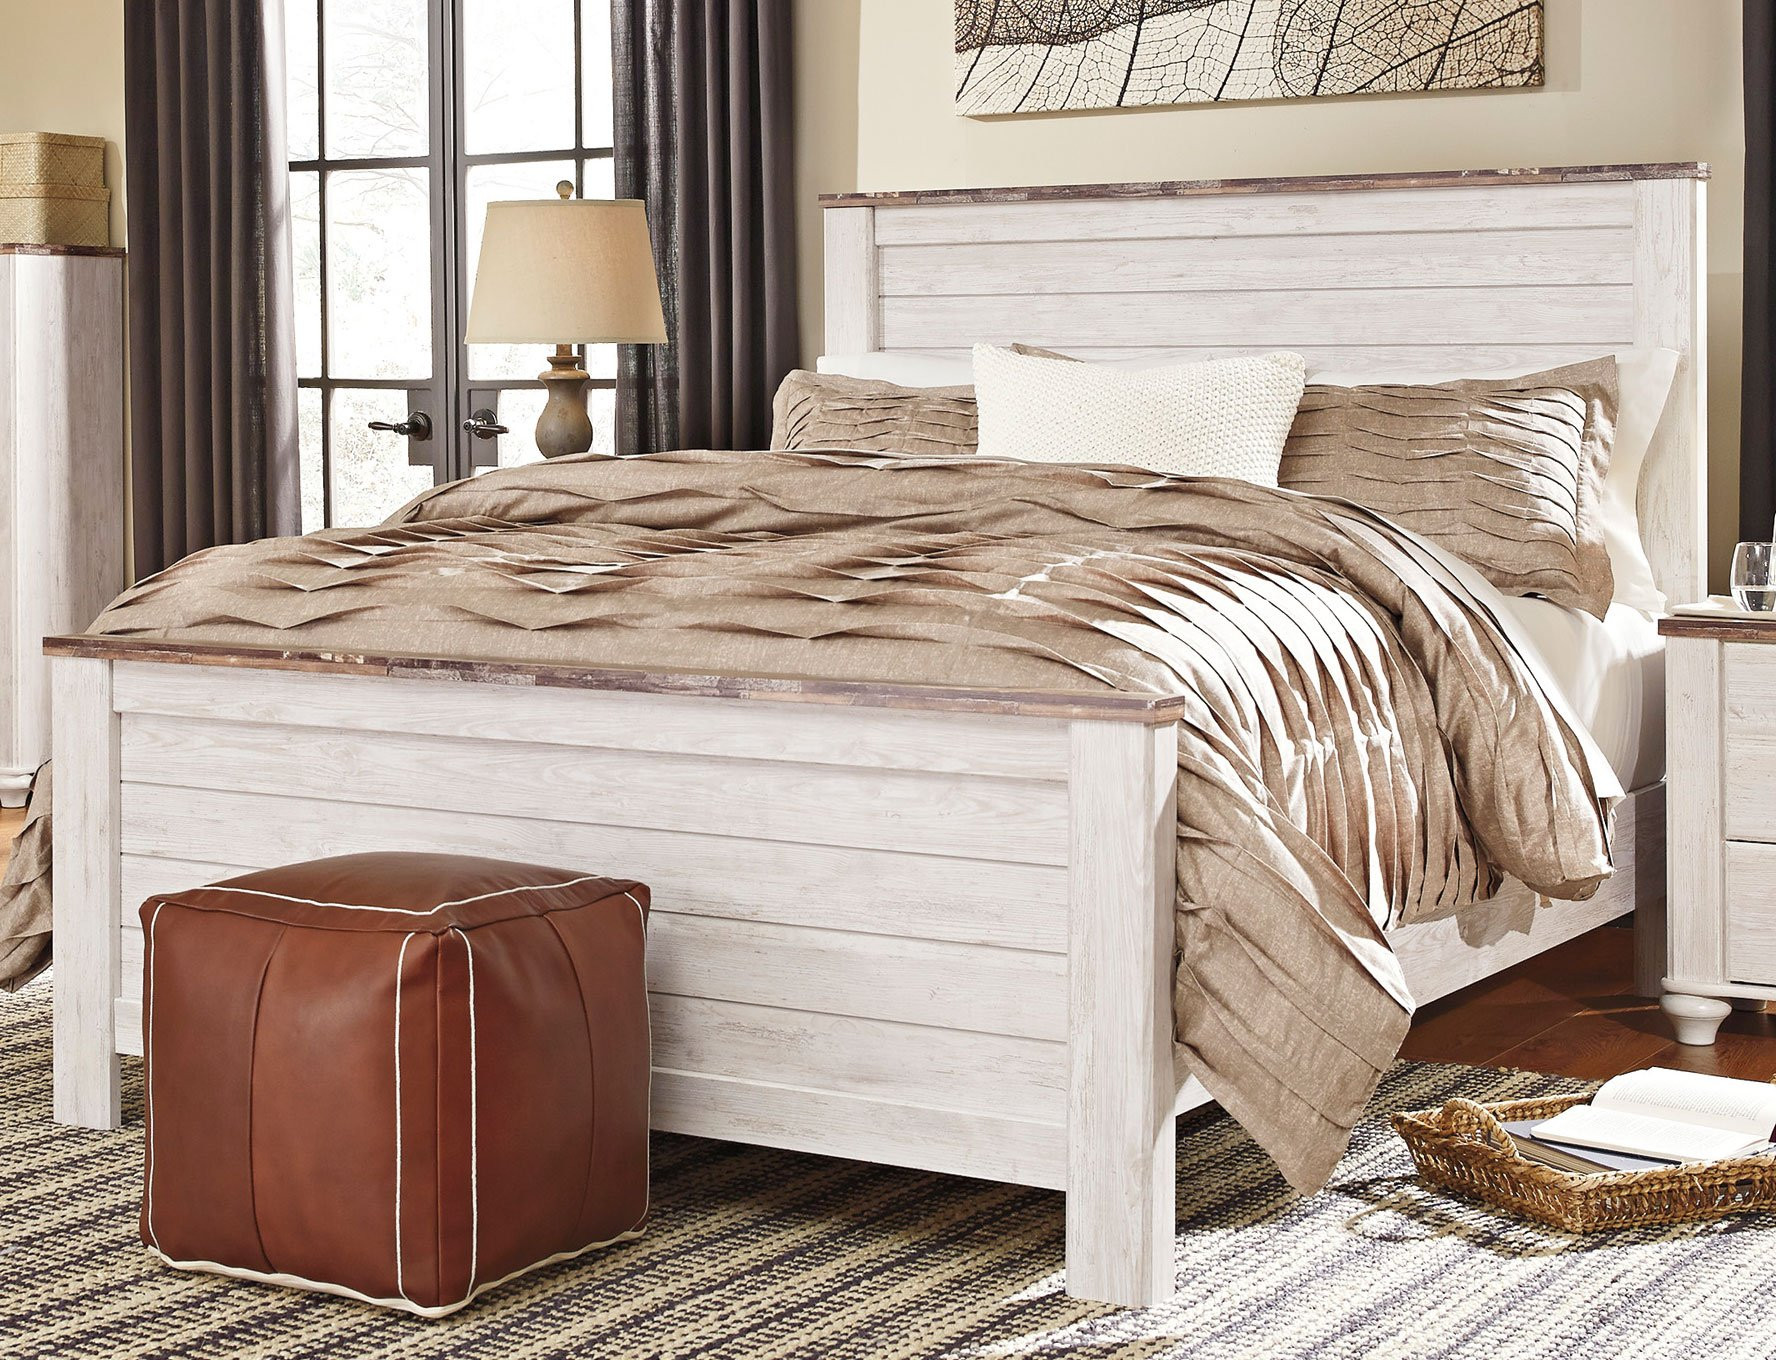 Rustic King Bedroom Set
 Classic Rustic Whitewashed 6 Piece King Bedroom Set